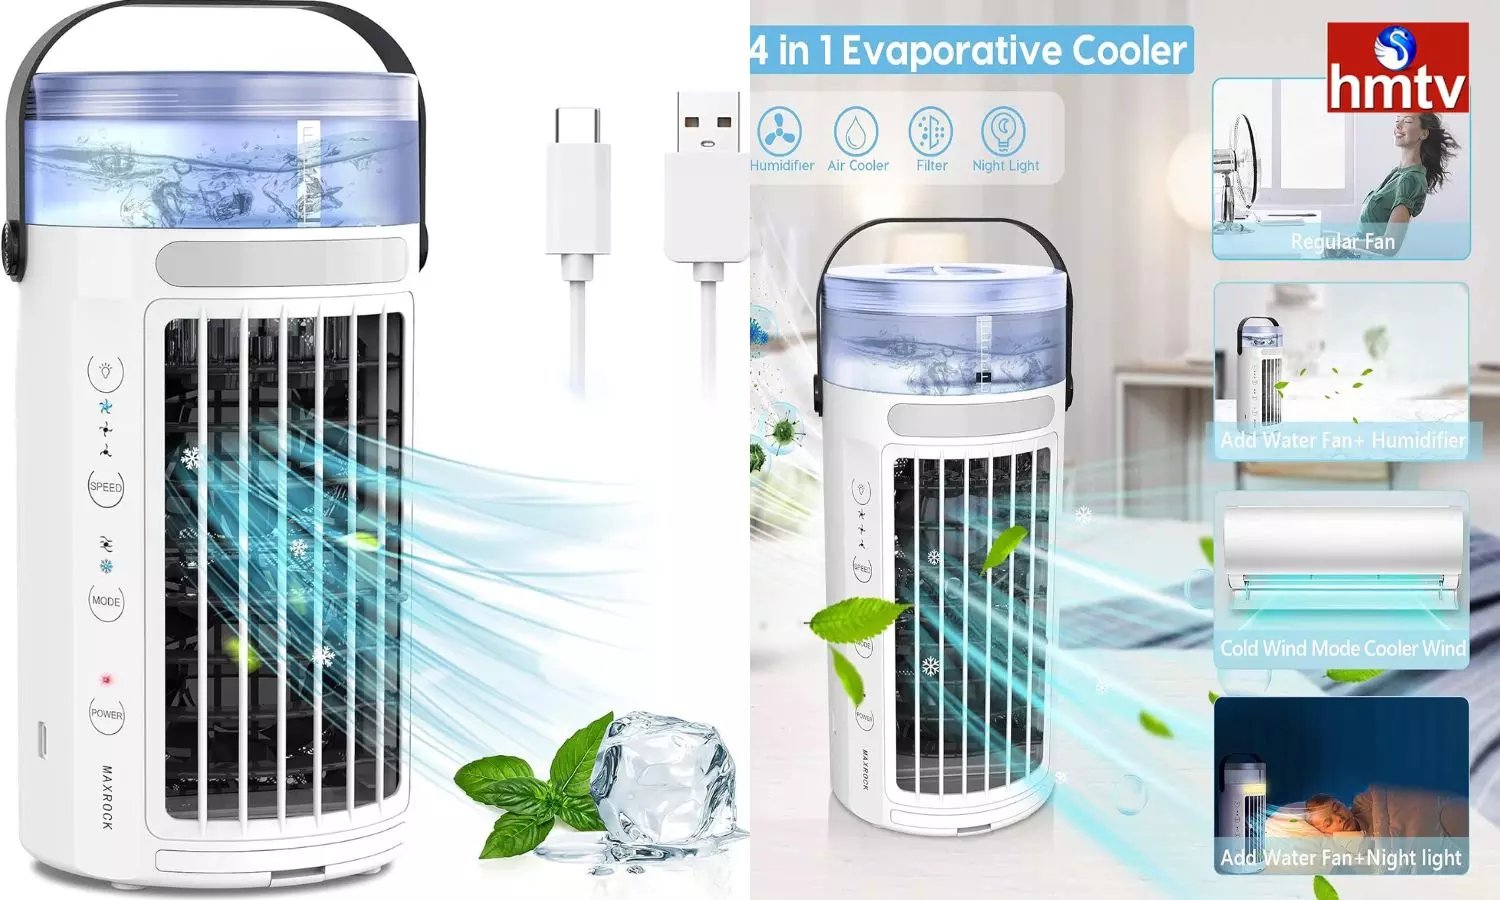 Maxrock Portable Air Conditioner Fan Mini Evaporative Air Cooler 3 Speed Super Quiet Desk Air Cooling Fan Check Price and Features